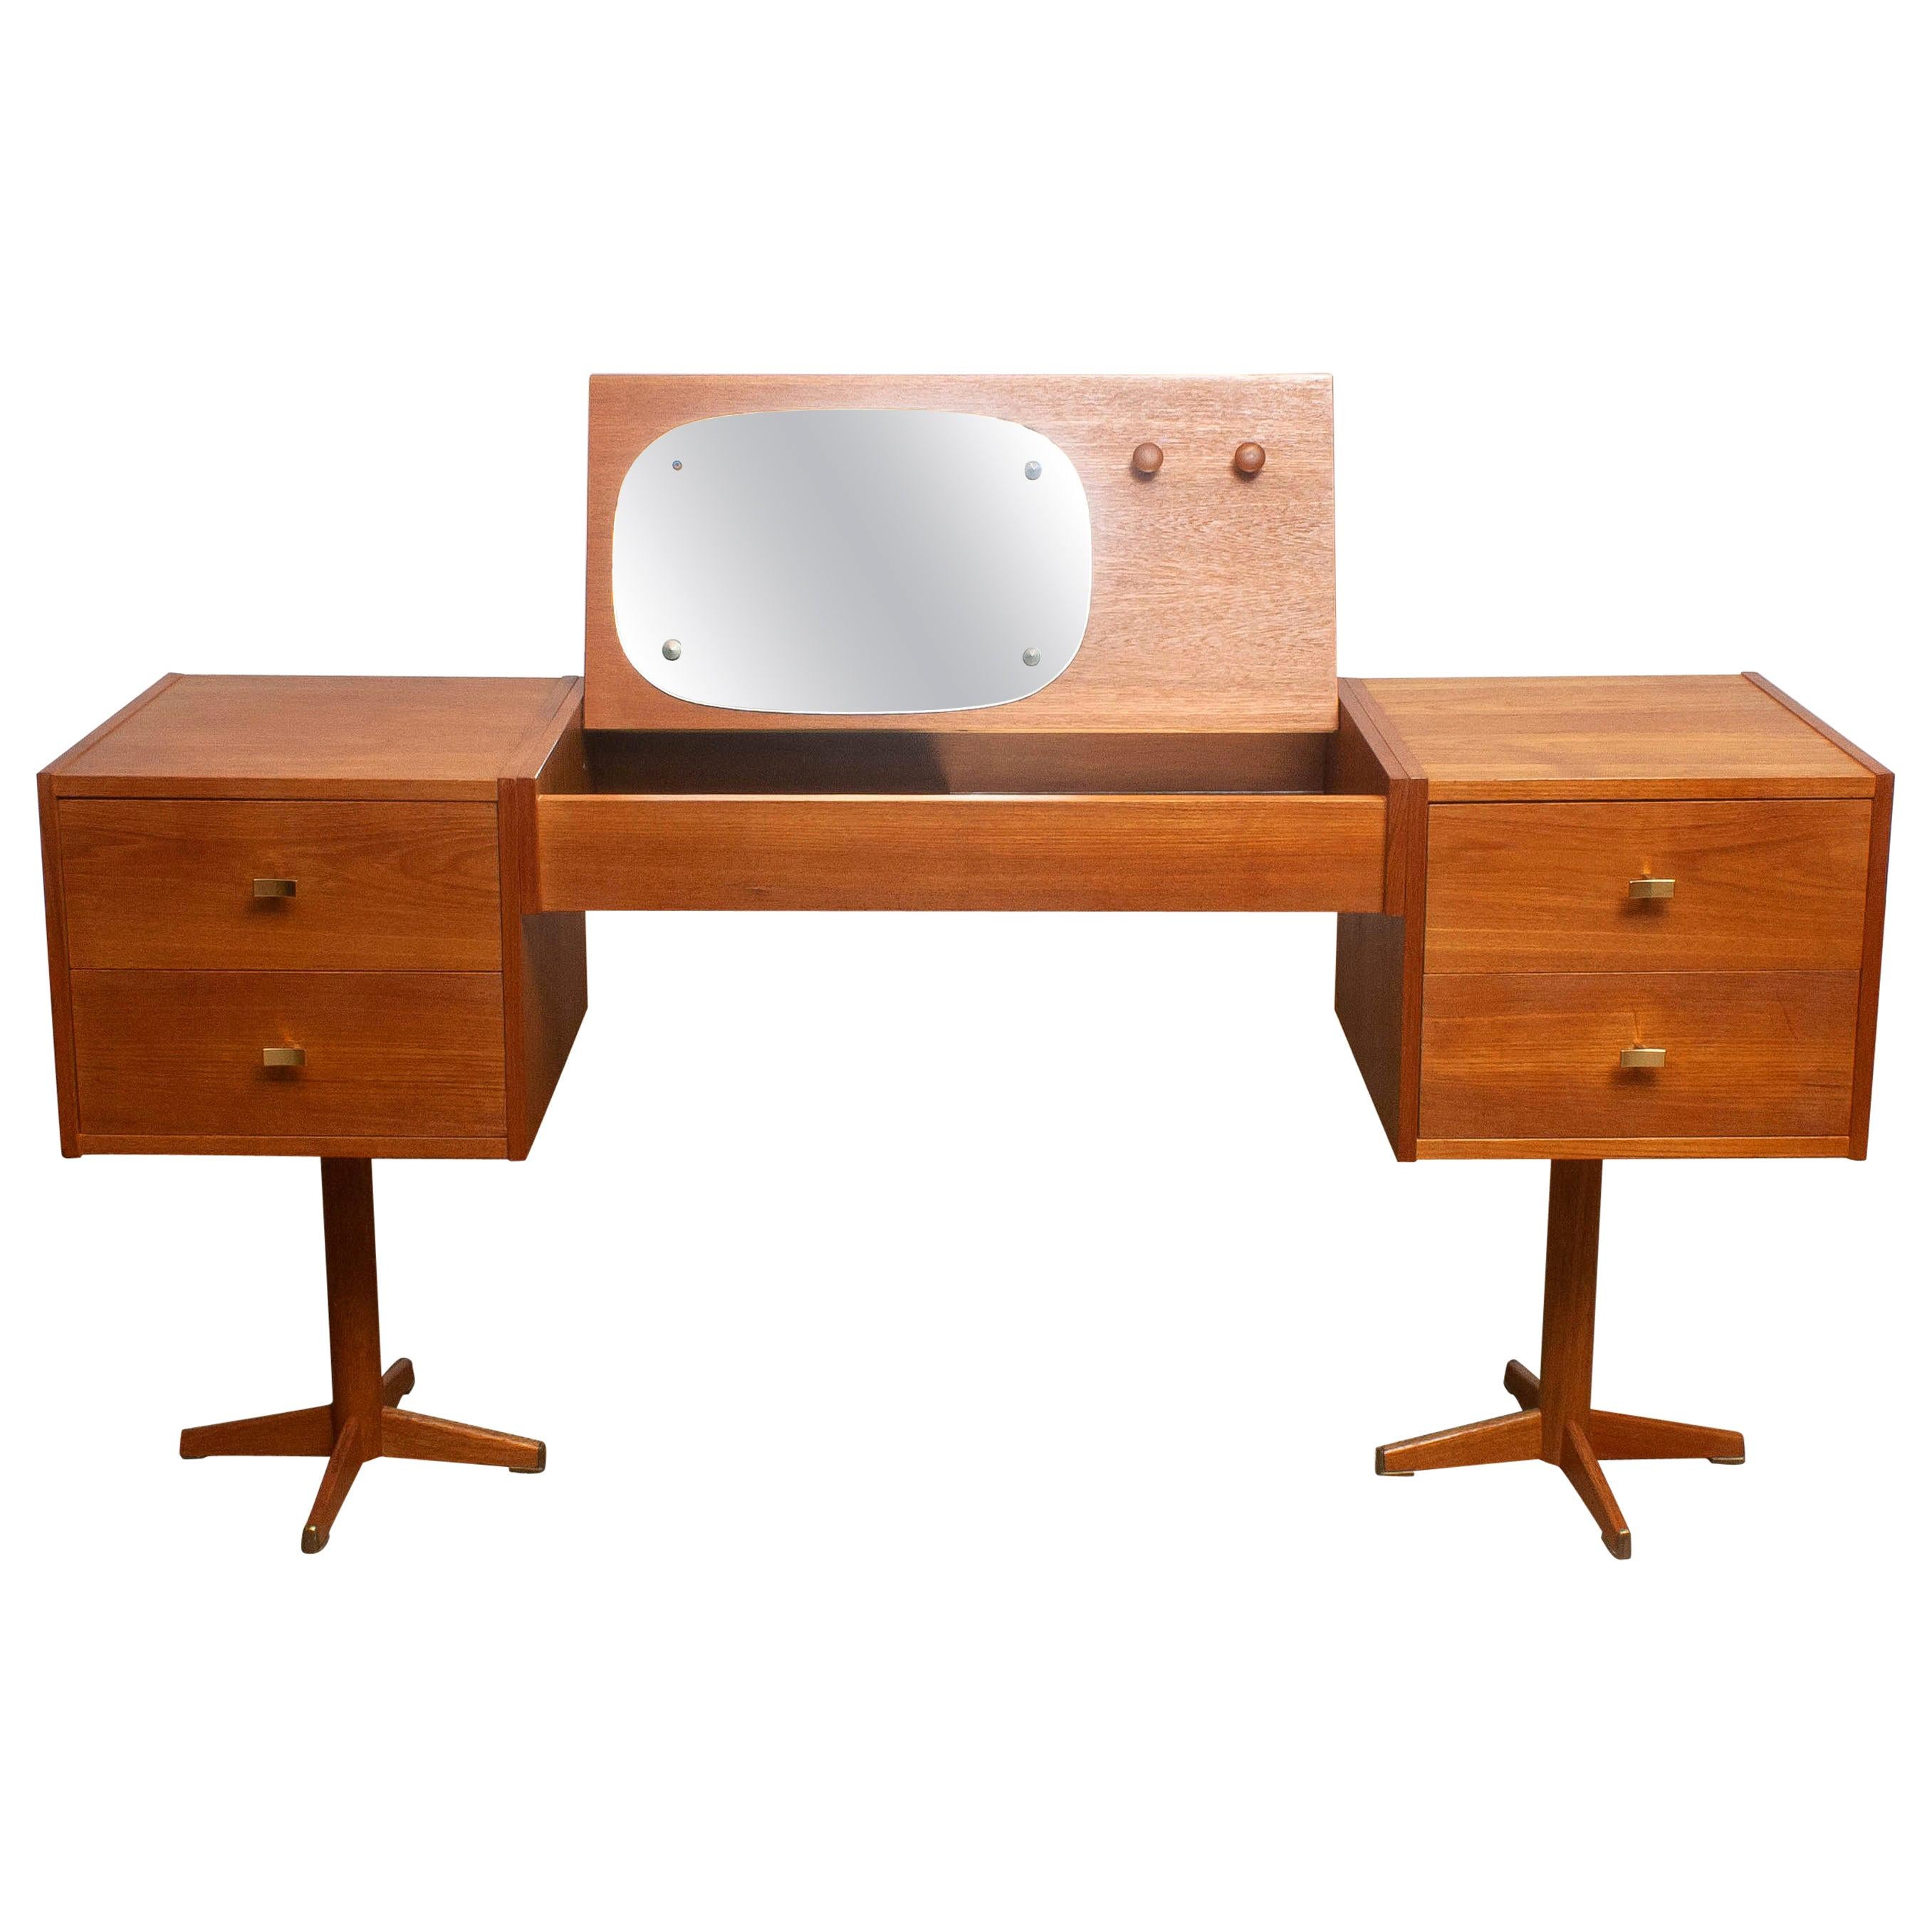 Beautiful vanity desk made in Scandinavian, Sweden.
This piece is in a very nice and good condition.
It is made of teak with four drawers with brass handles and in the top a flap with storage space and mirrors and hanging knobs.
The legs are